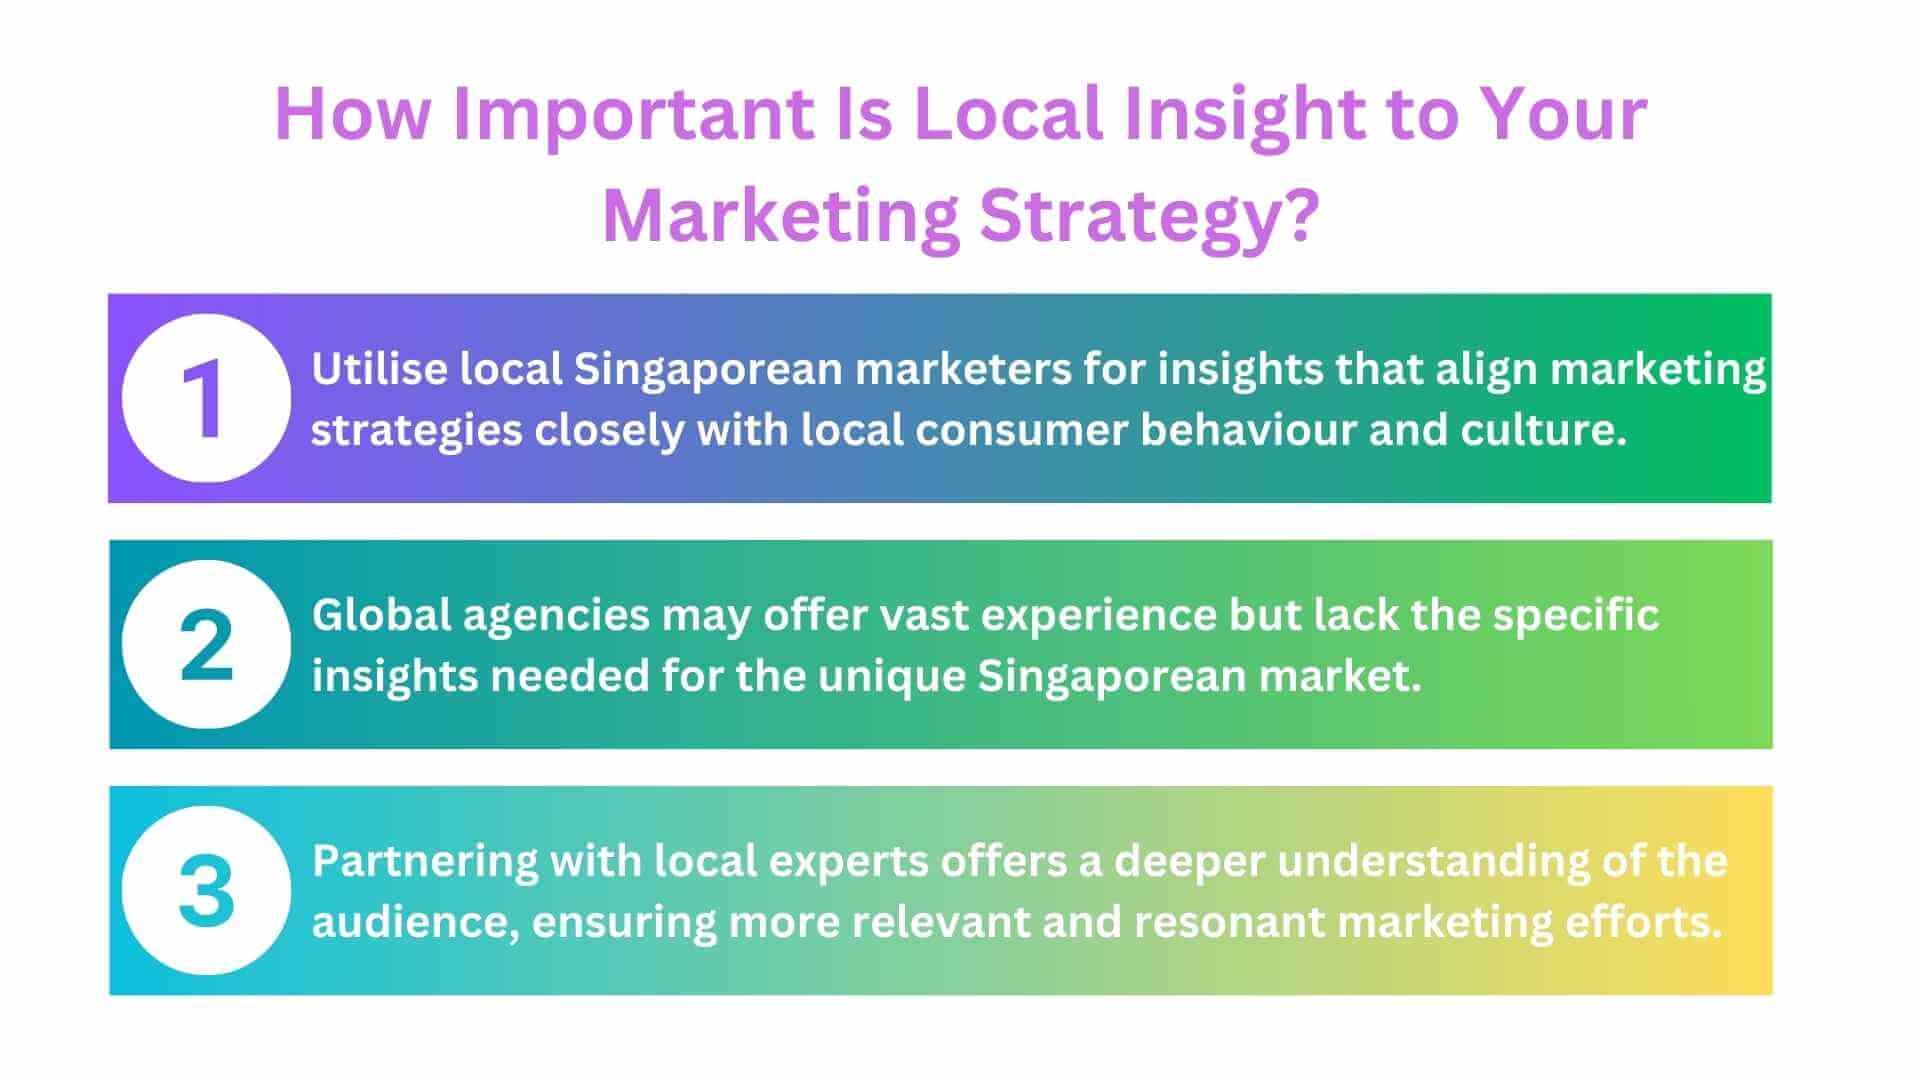 How Important Is Local Insight to Your Marketing Strategy?